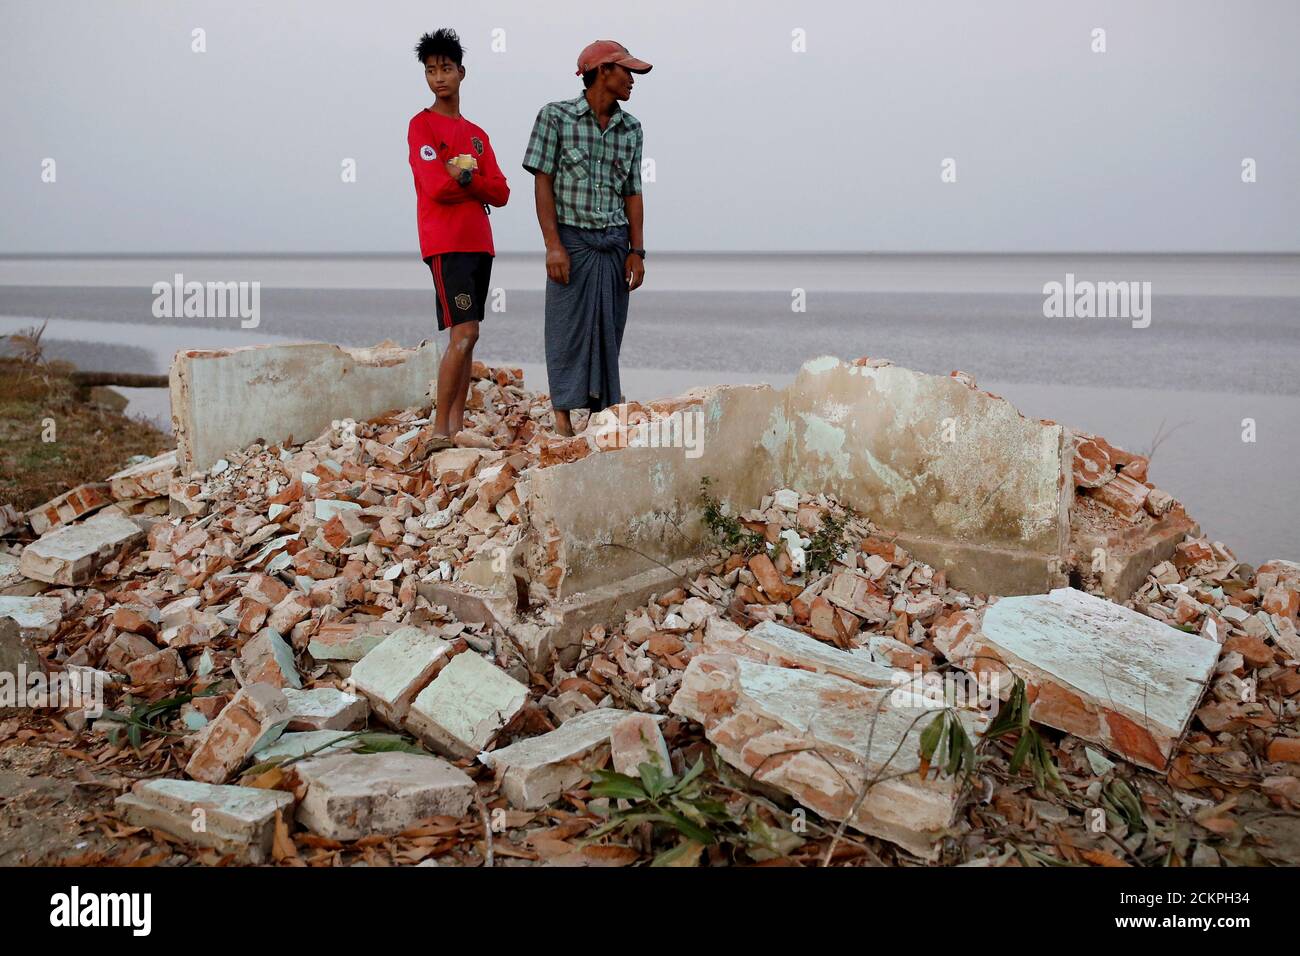 Myo Zaw, 15, and his father Aung So Oo, 45, stand at the ruins of a monastery after the riverbank it was located on collapsed into the water in Ta Dar U village, Bago, Myanmar, February 5, 2020. Photo taken on February 5, 2020. REUTERS/Ann Wang Stock Photo